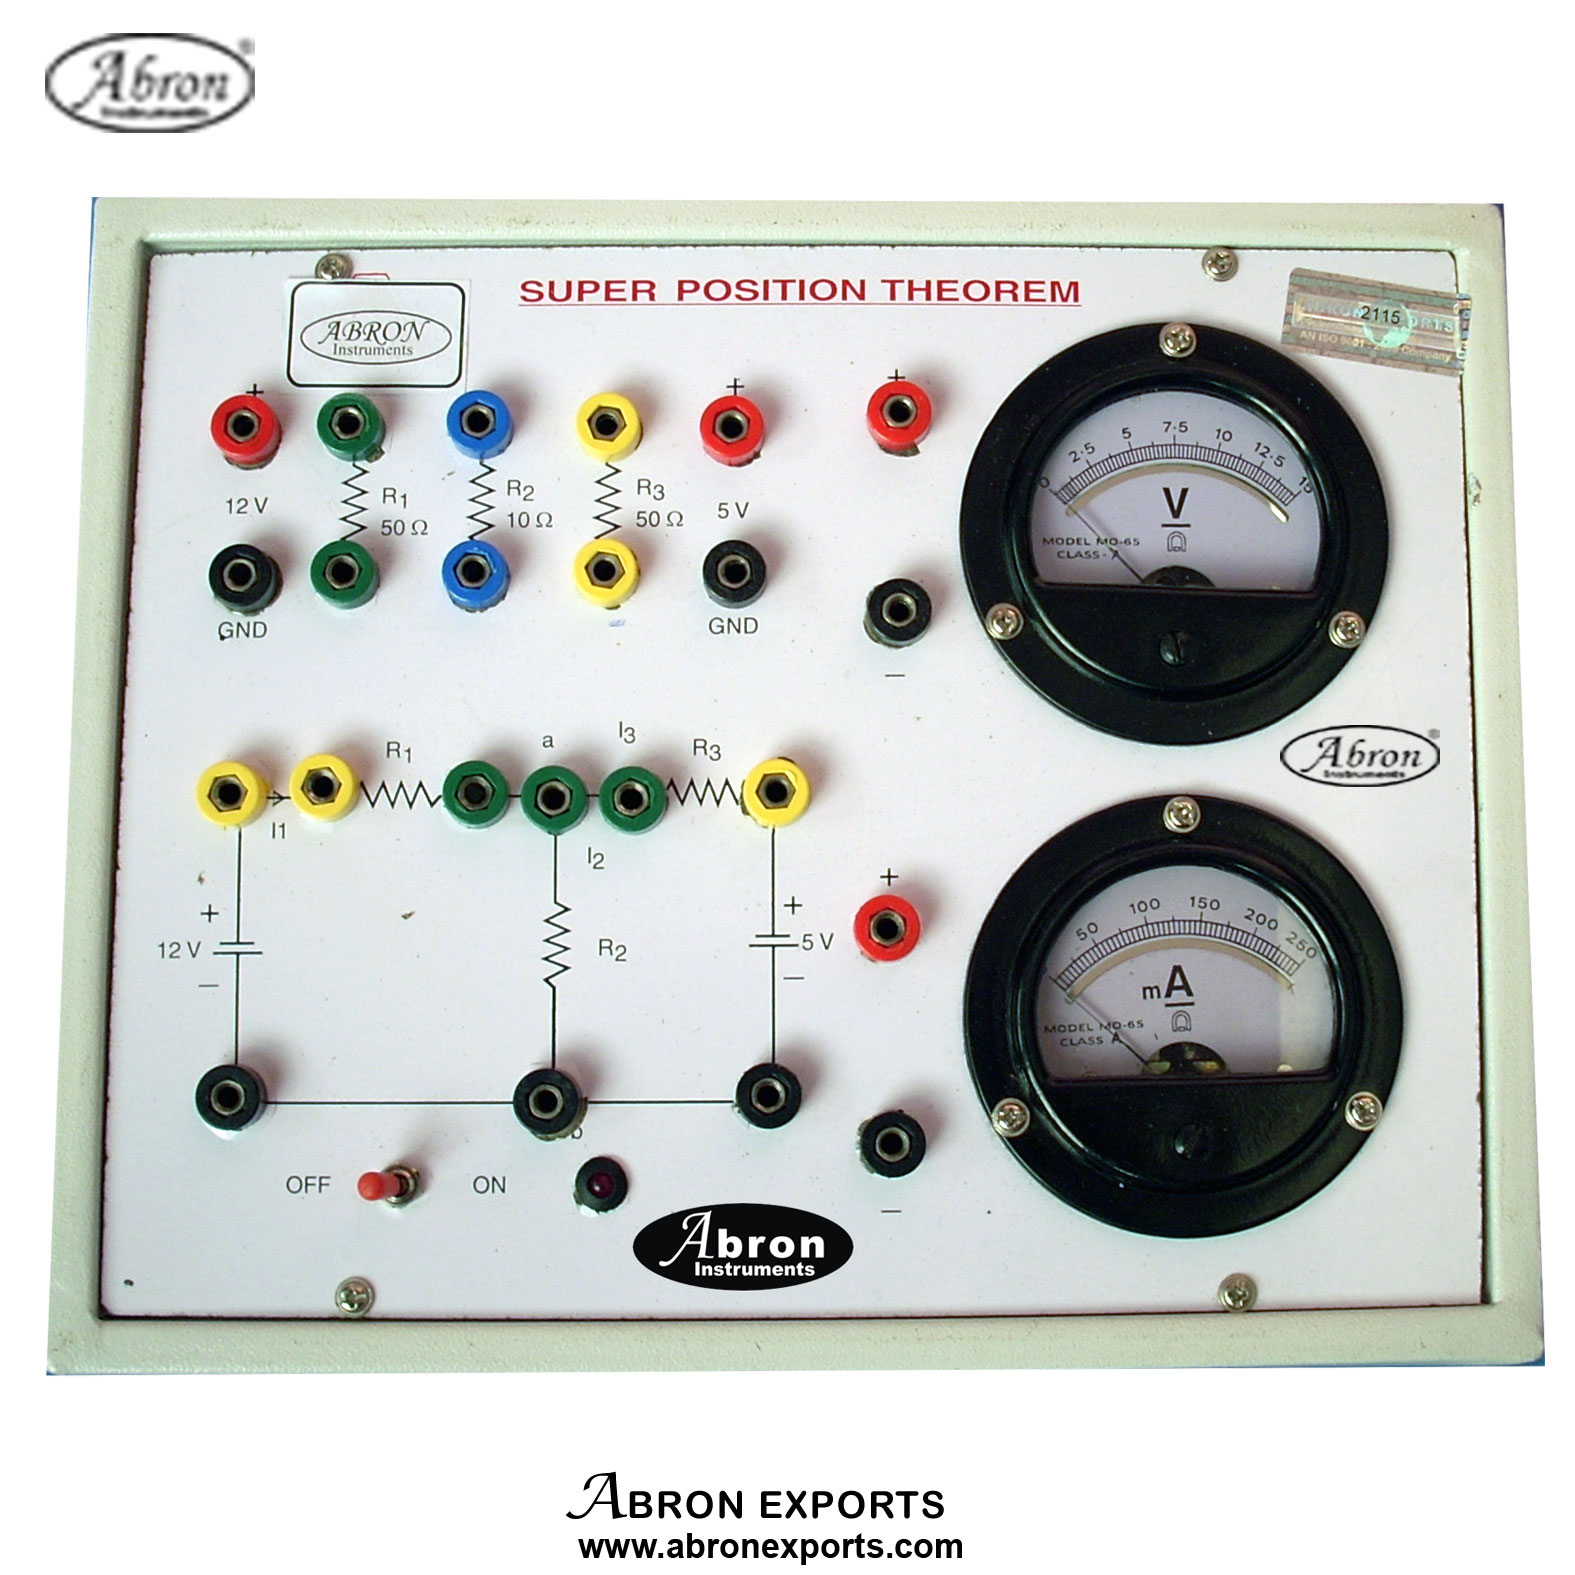 Theorems Super Position Network with Circuit and Power Supply AE-1430B